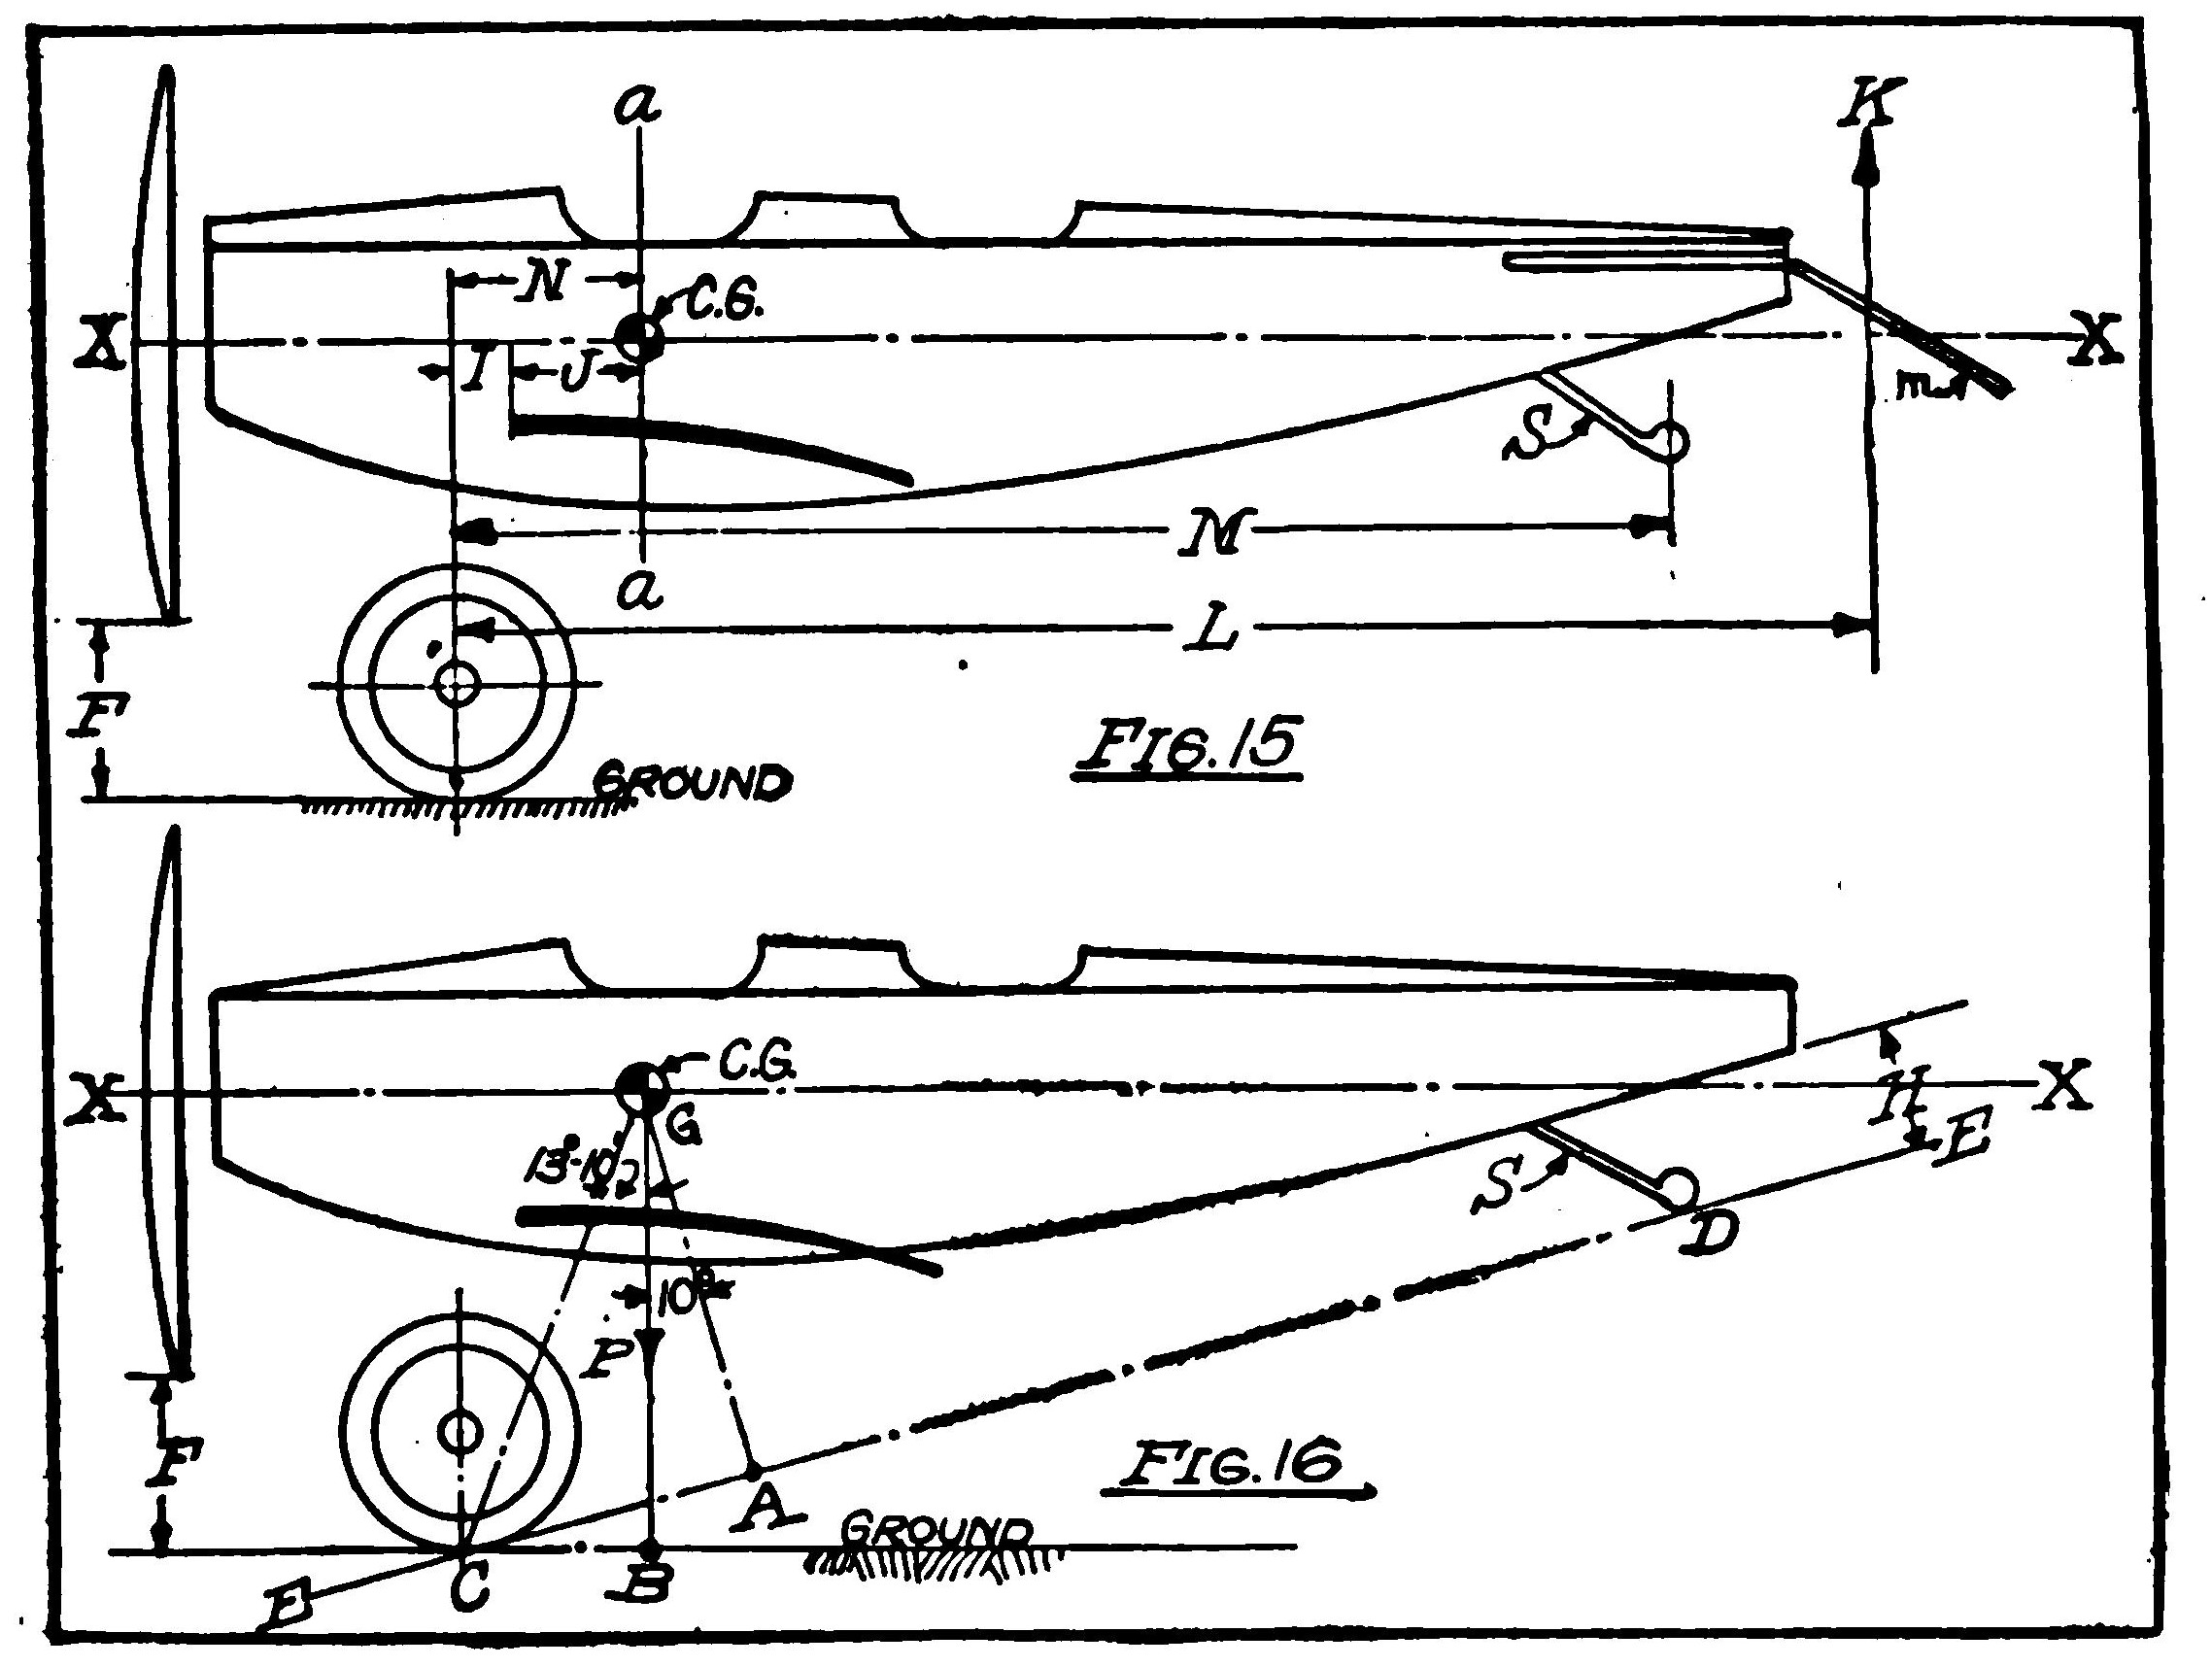 Figs. 15-16. Methods of Calculating Wheel Position on Two Wheel Chassis. This Is an Important Item in the Design of an Aeroplane.